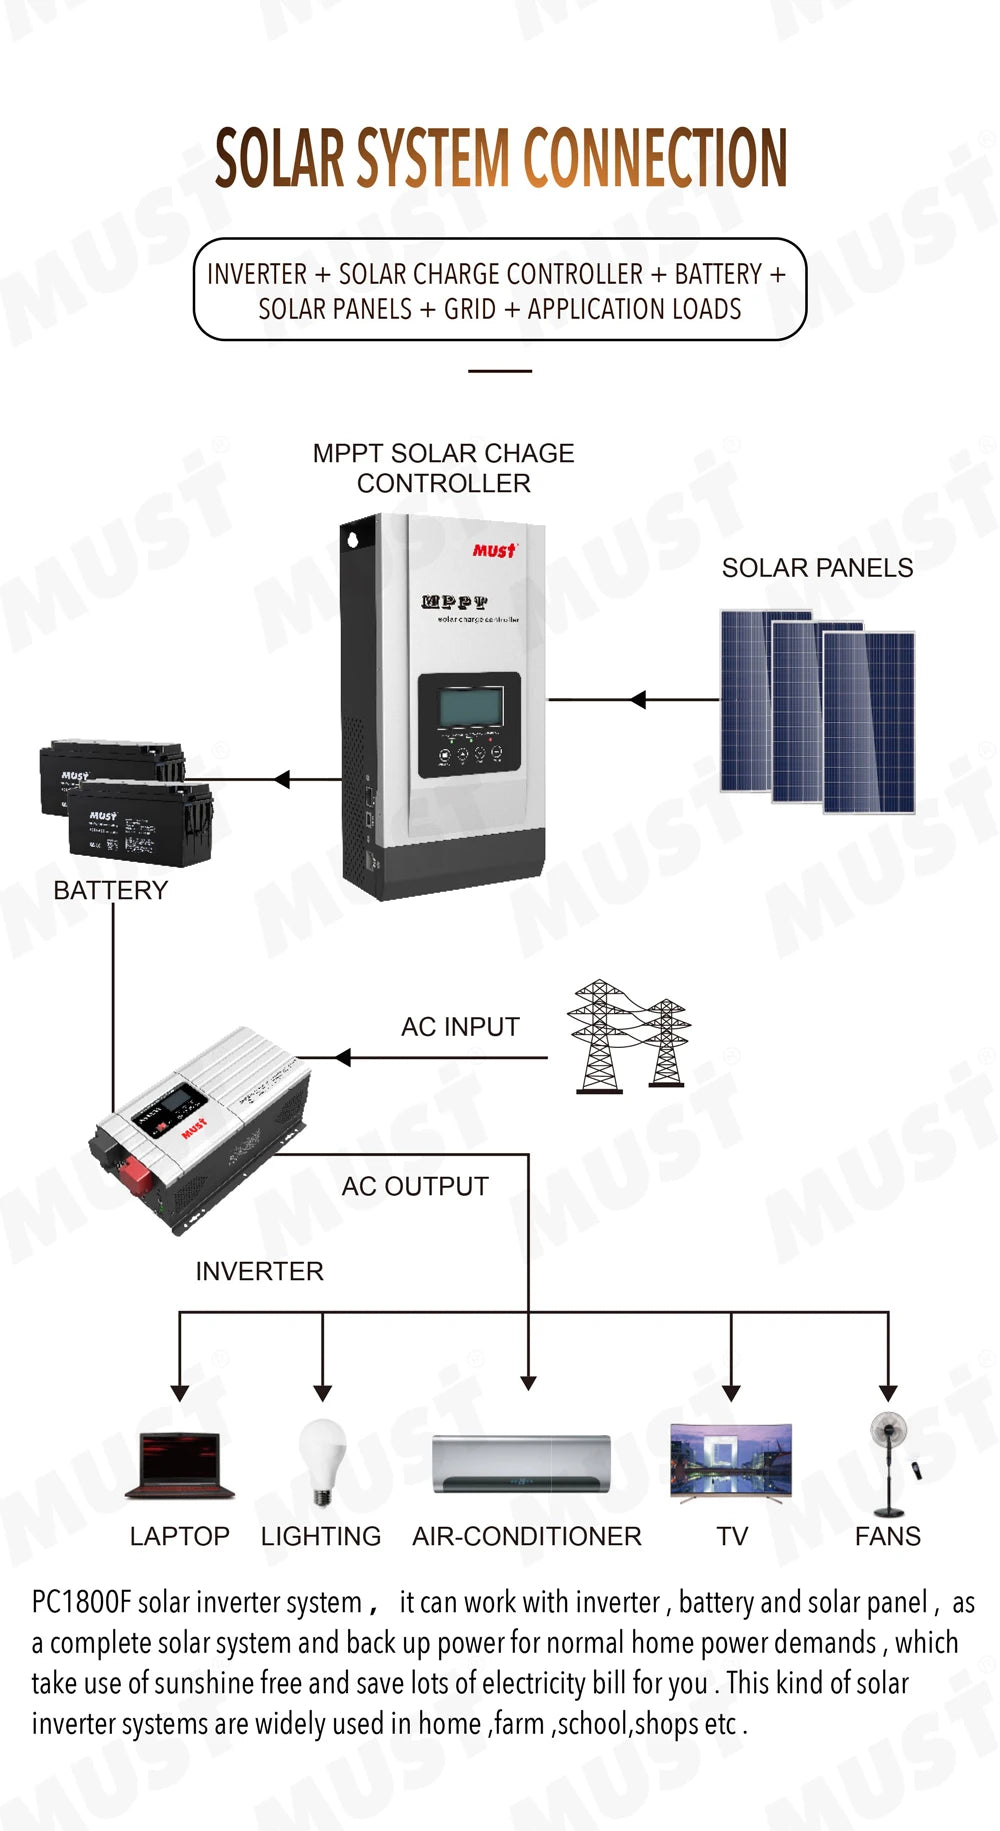 Comprehensive solar inverter system for home use, providing backup power for daily needs.